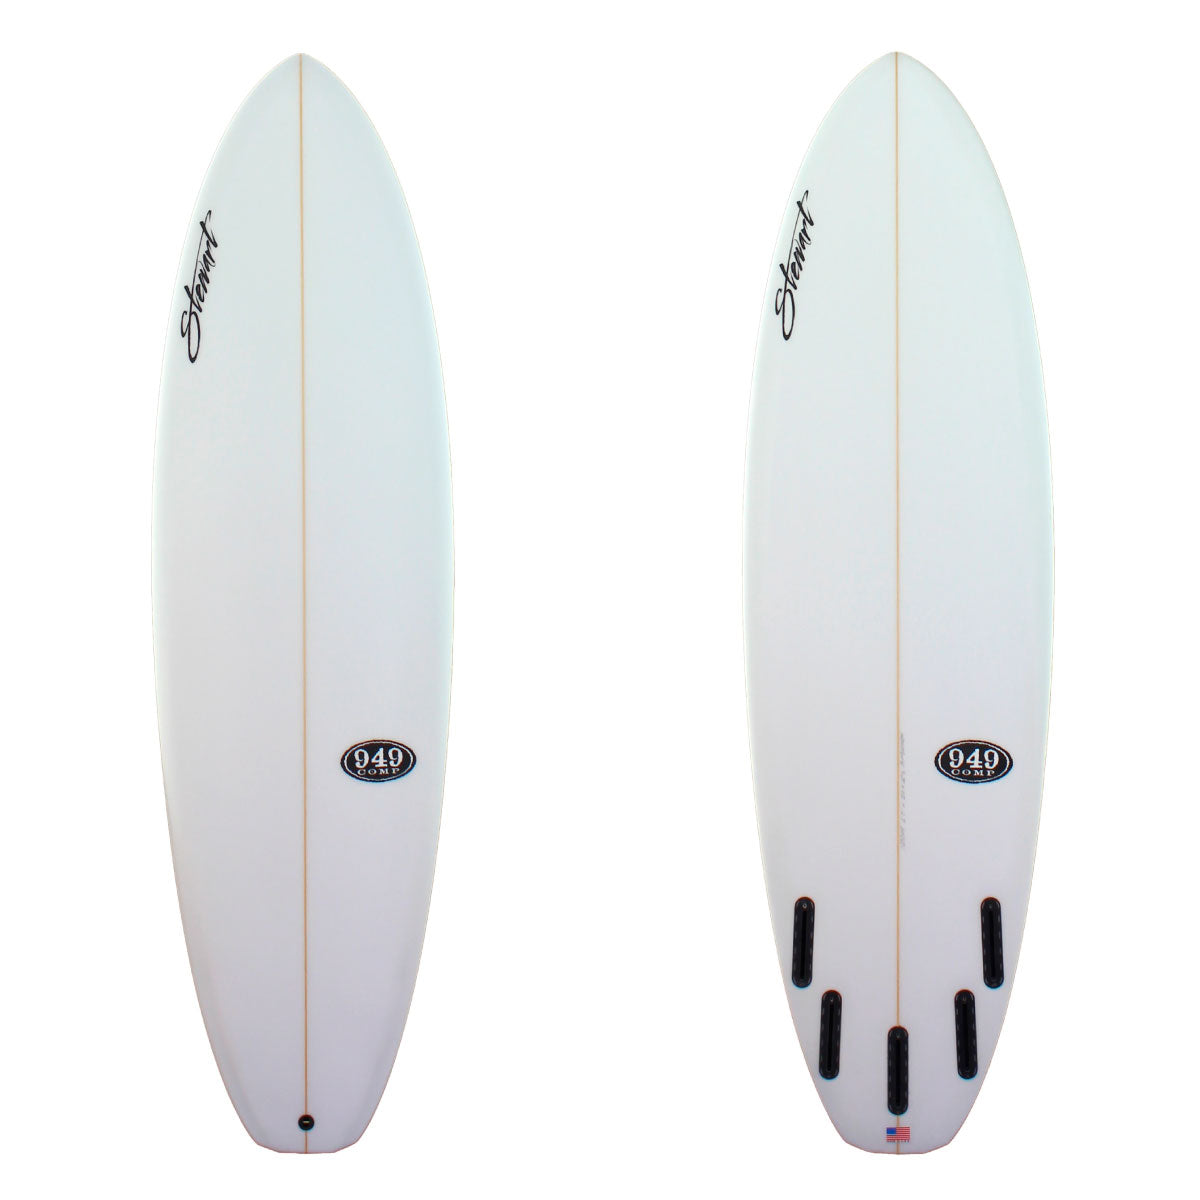 Stewart Surfboards 6'0" 949-Comp with clear white deck and bottom